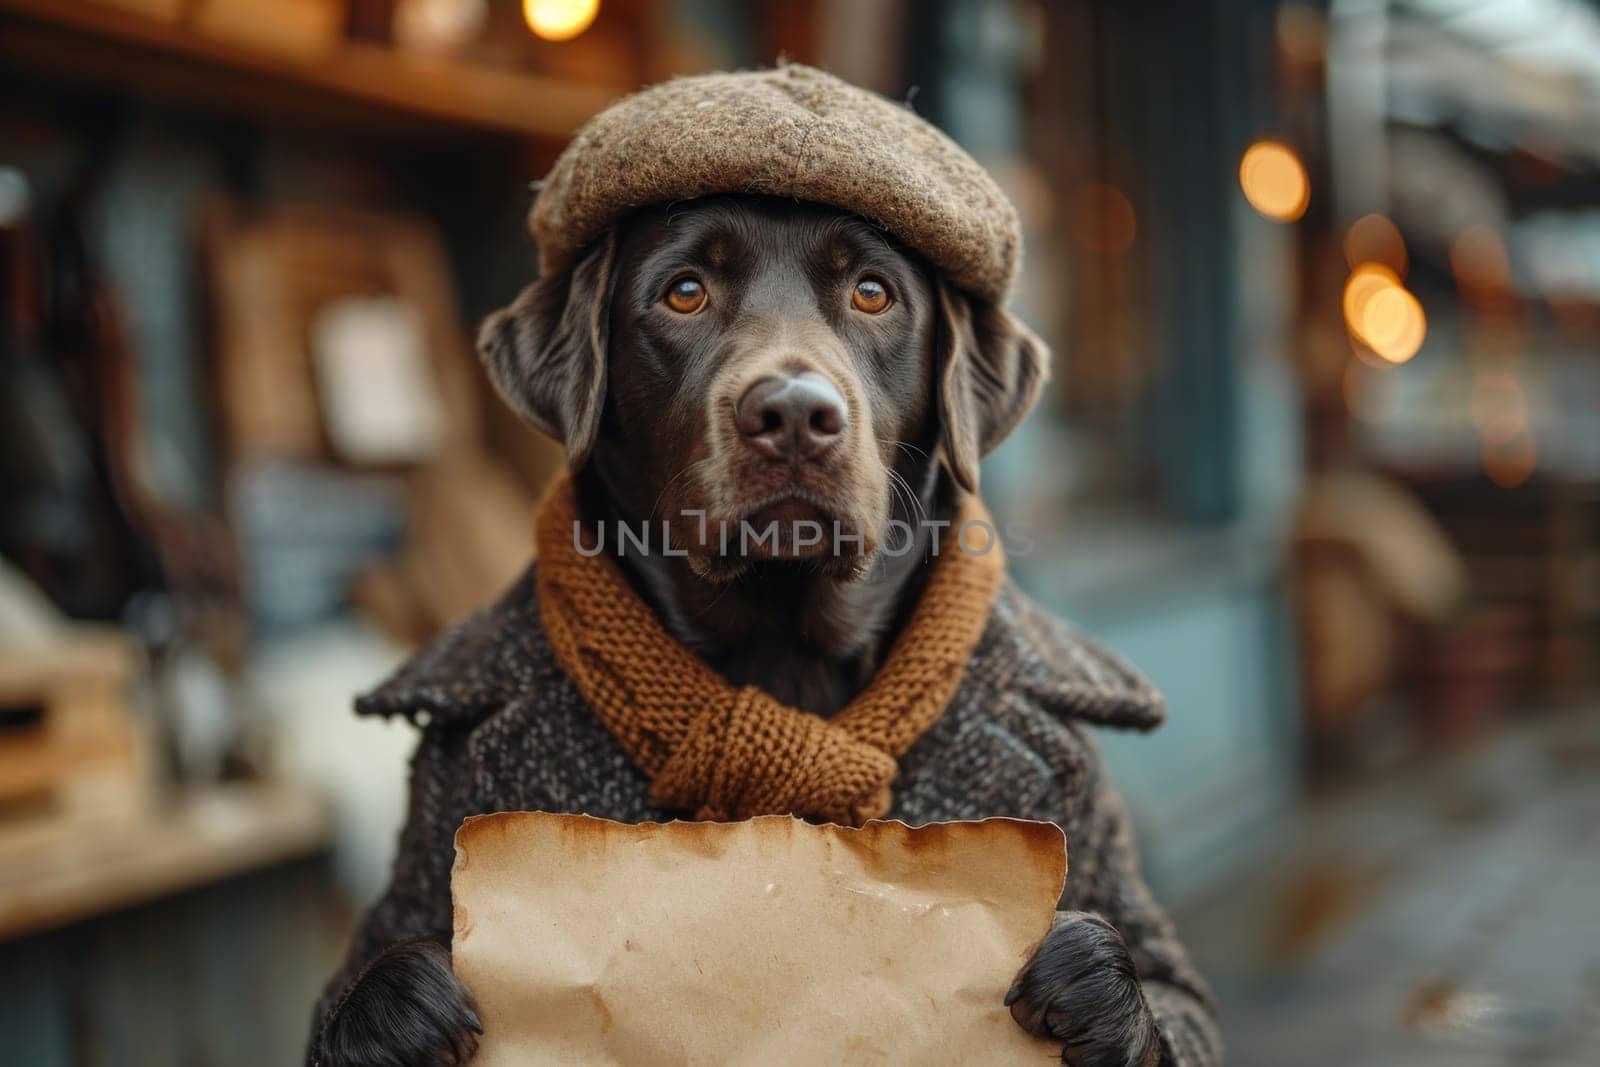 A dog in a hat and clothes reads a letter sitting in the interior.